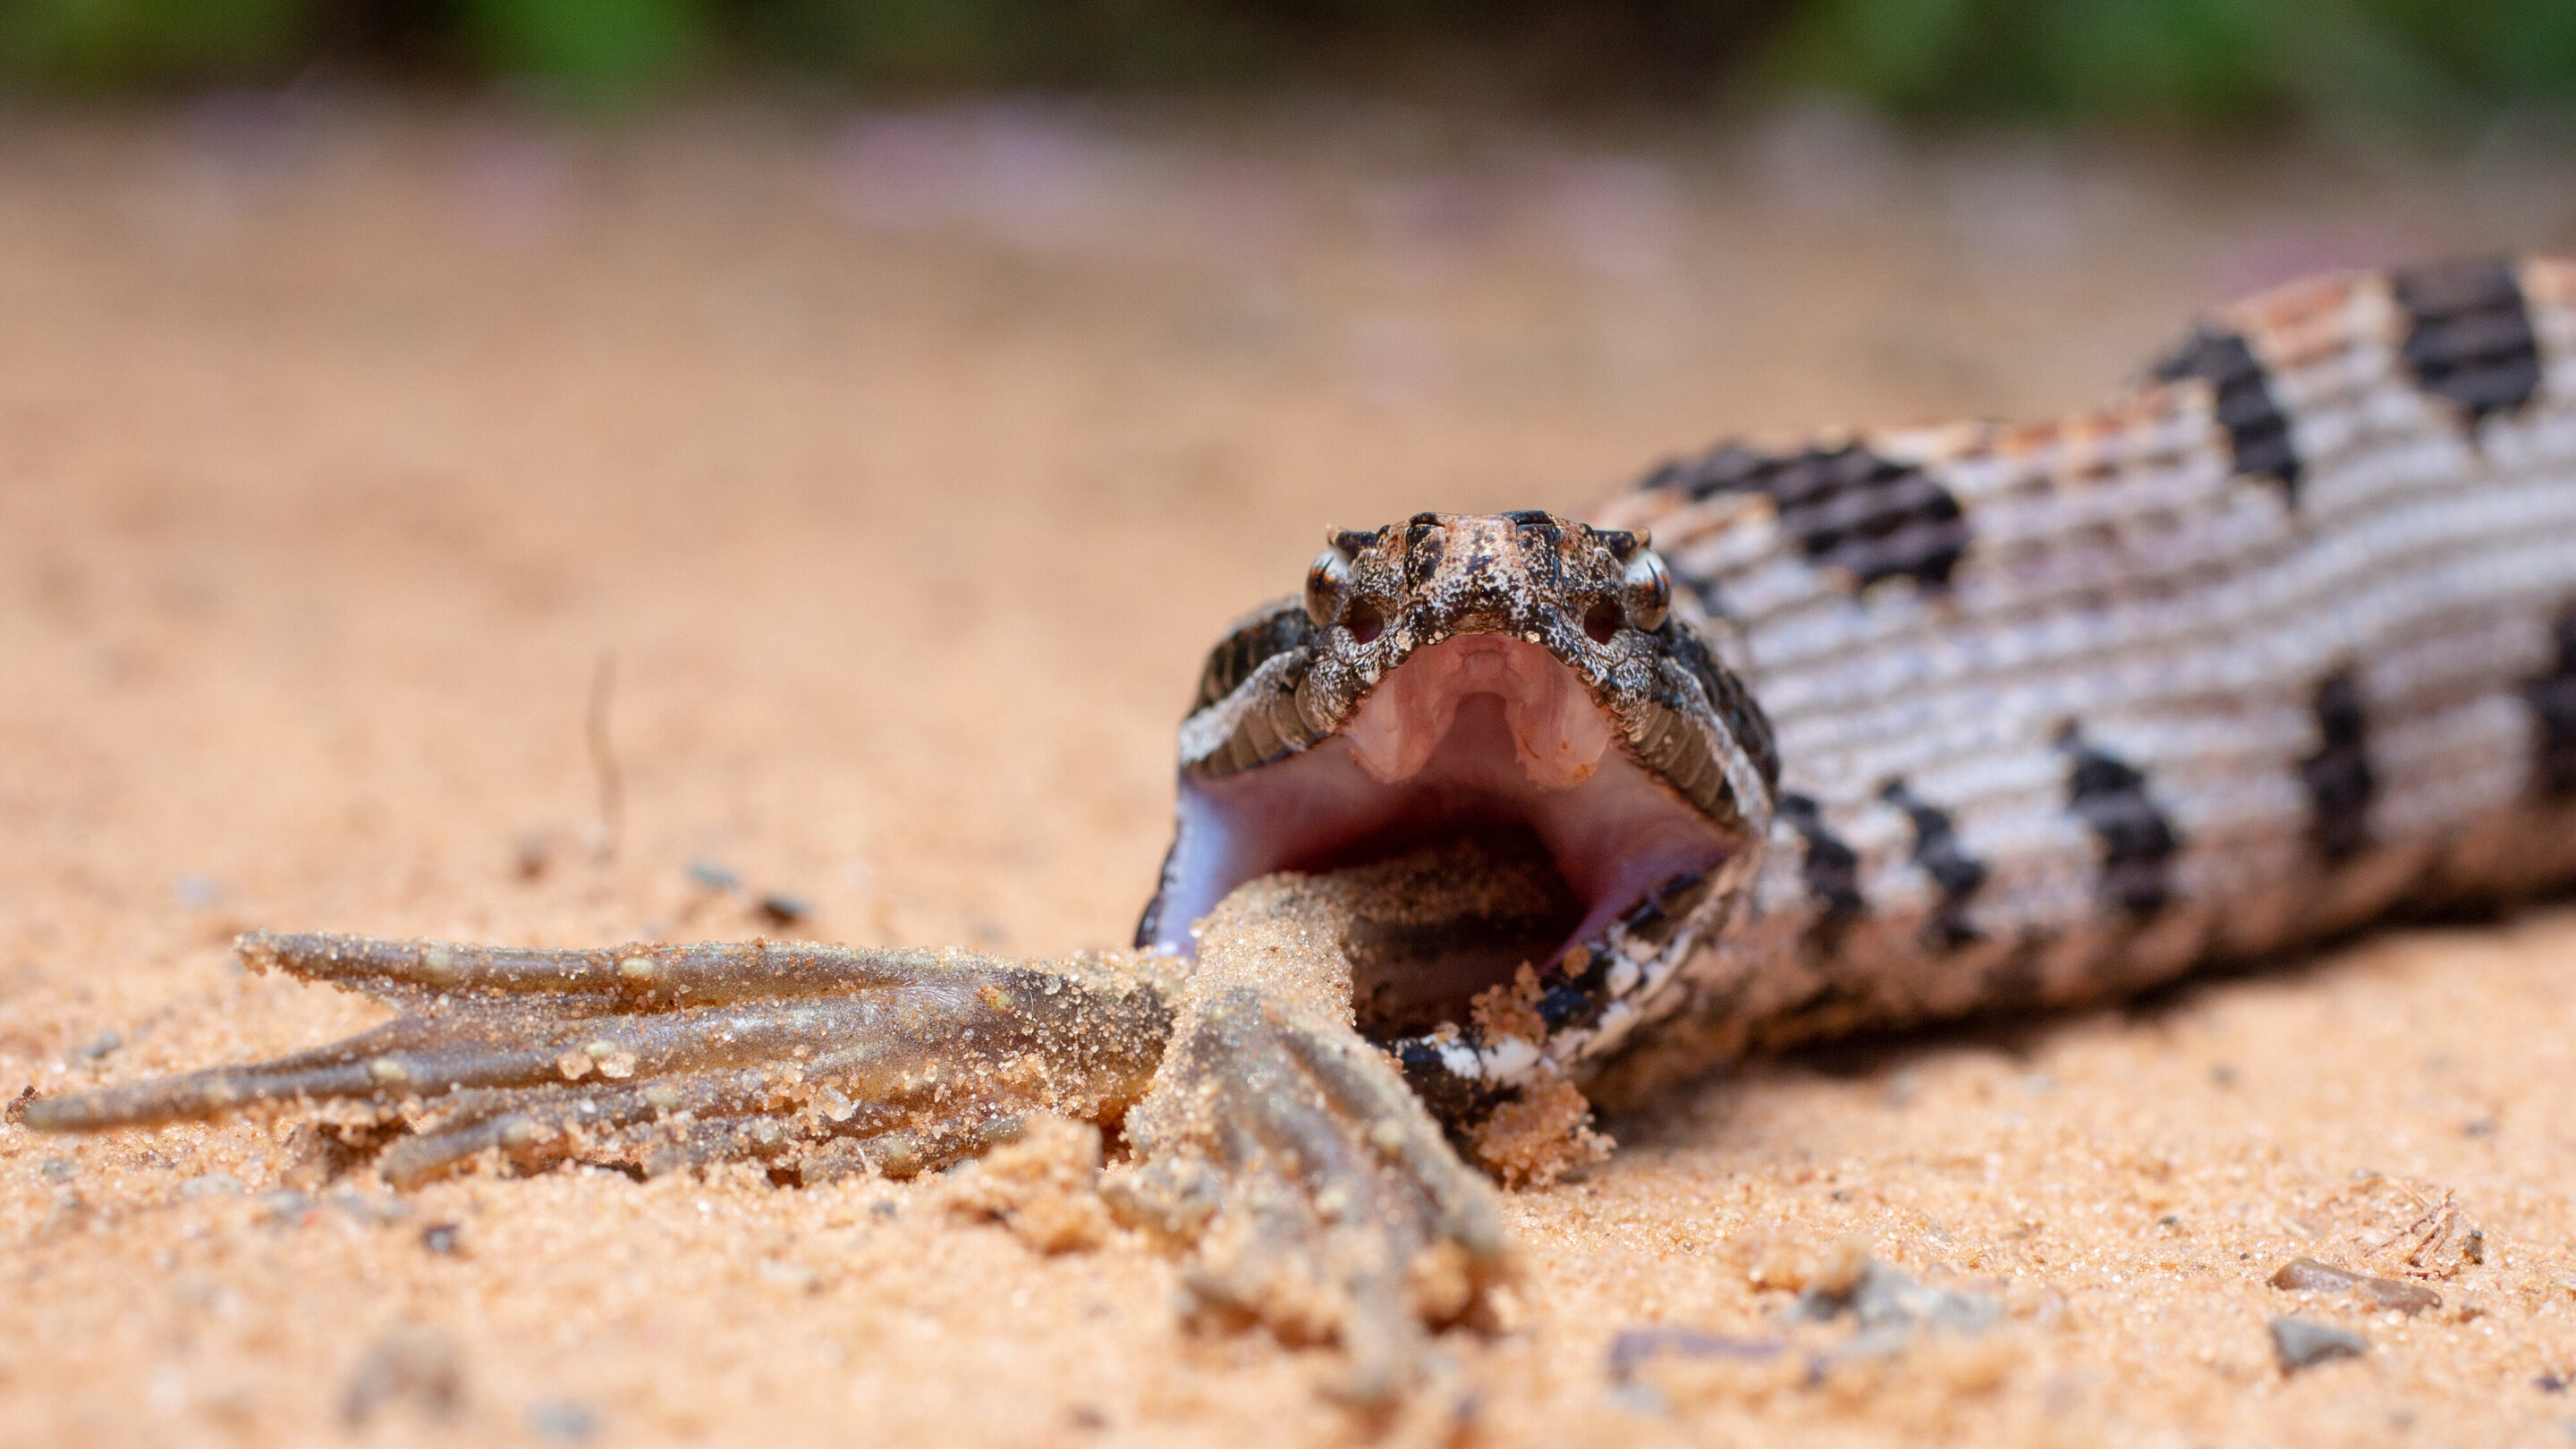 Researchers find the complexity of snake venom driven by a prey diet